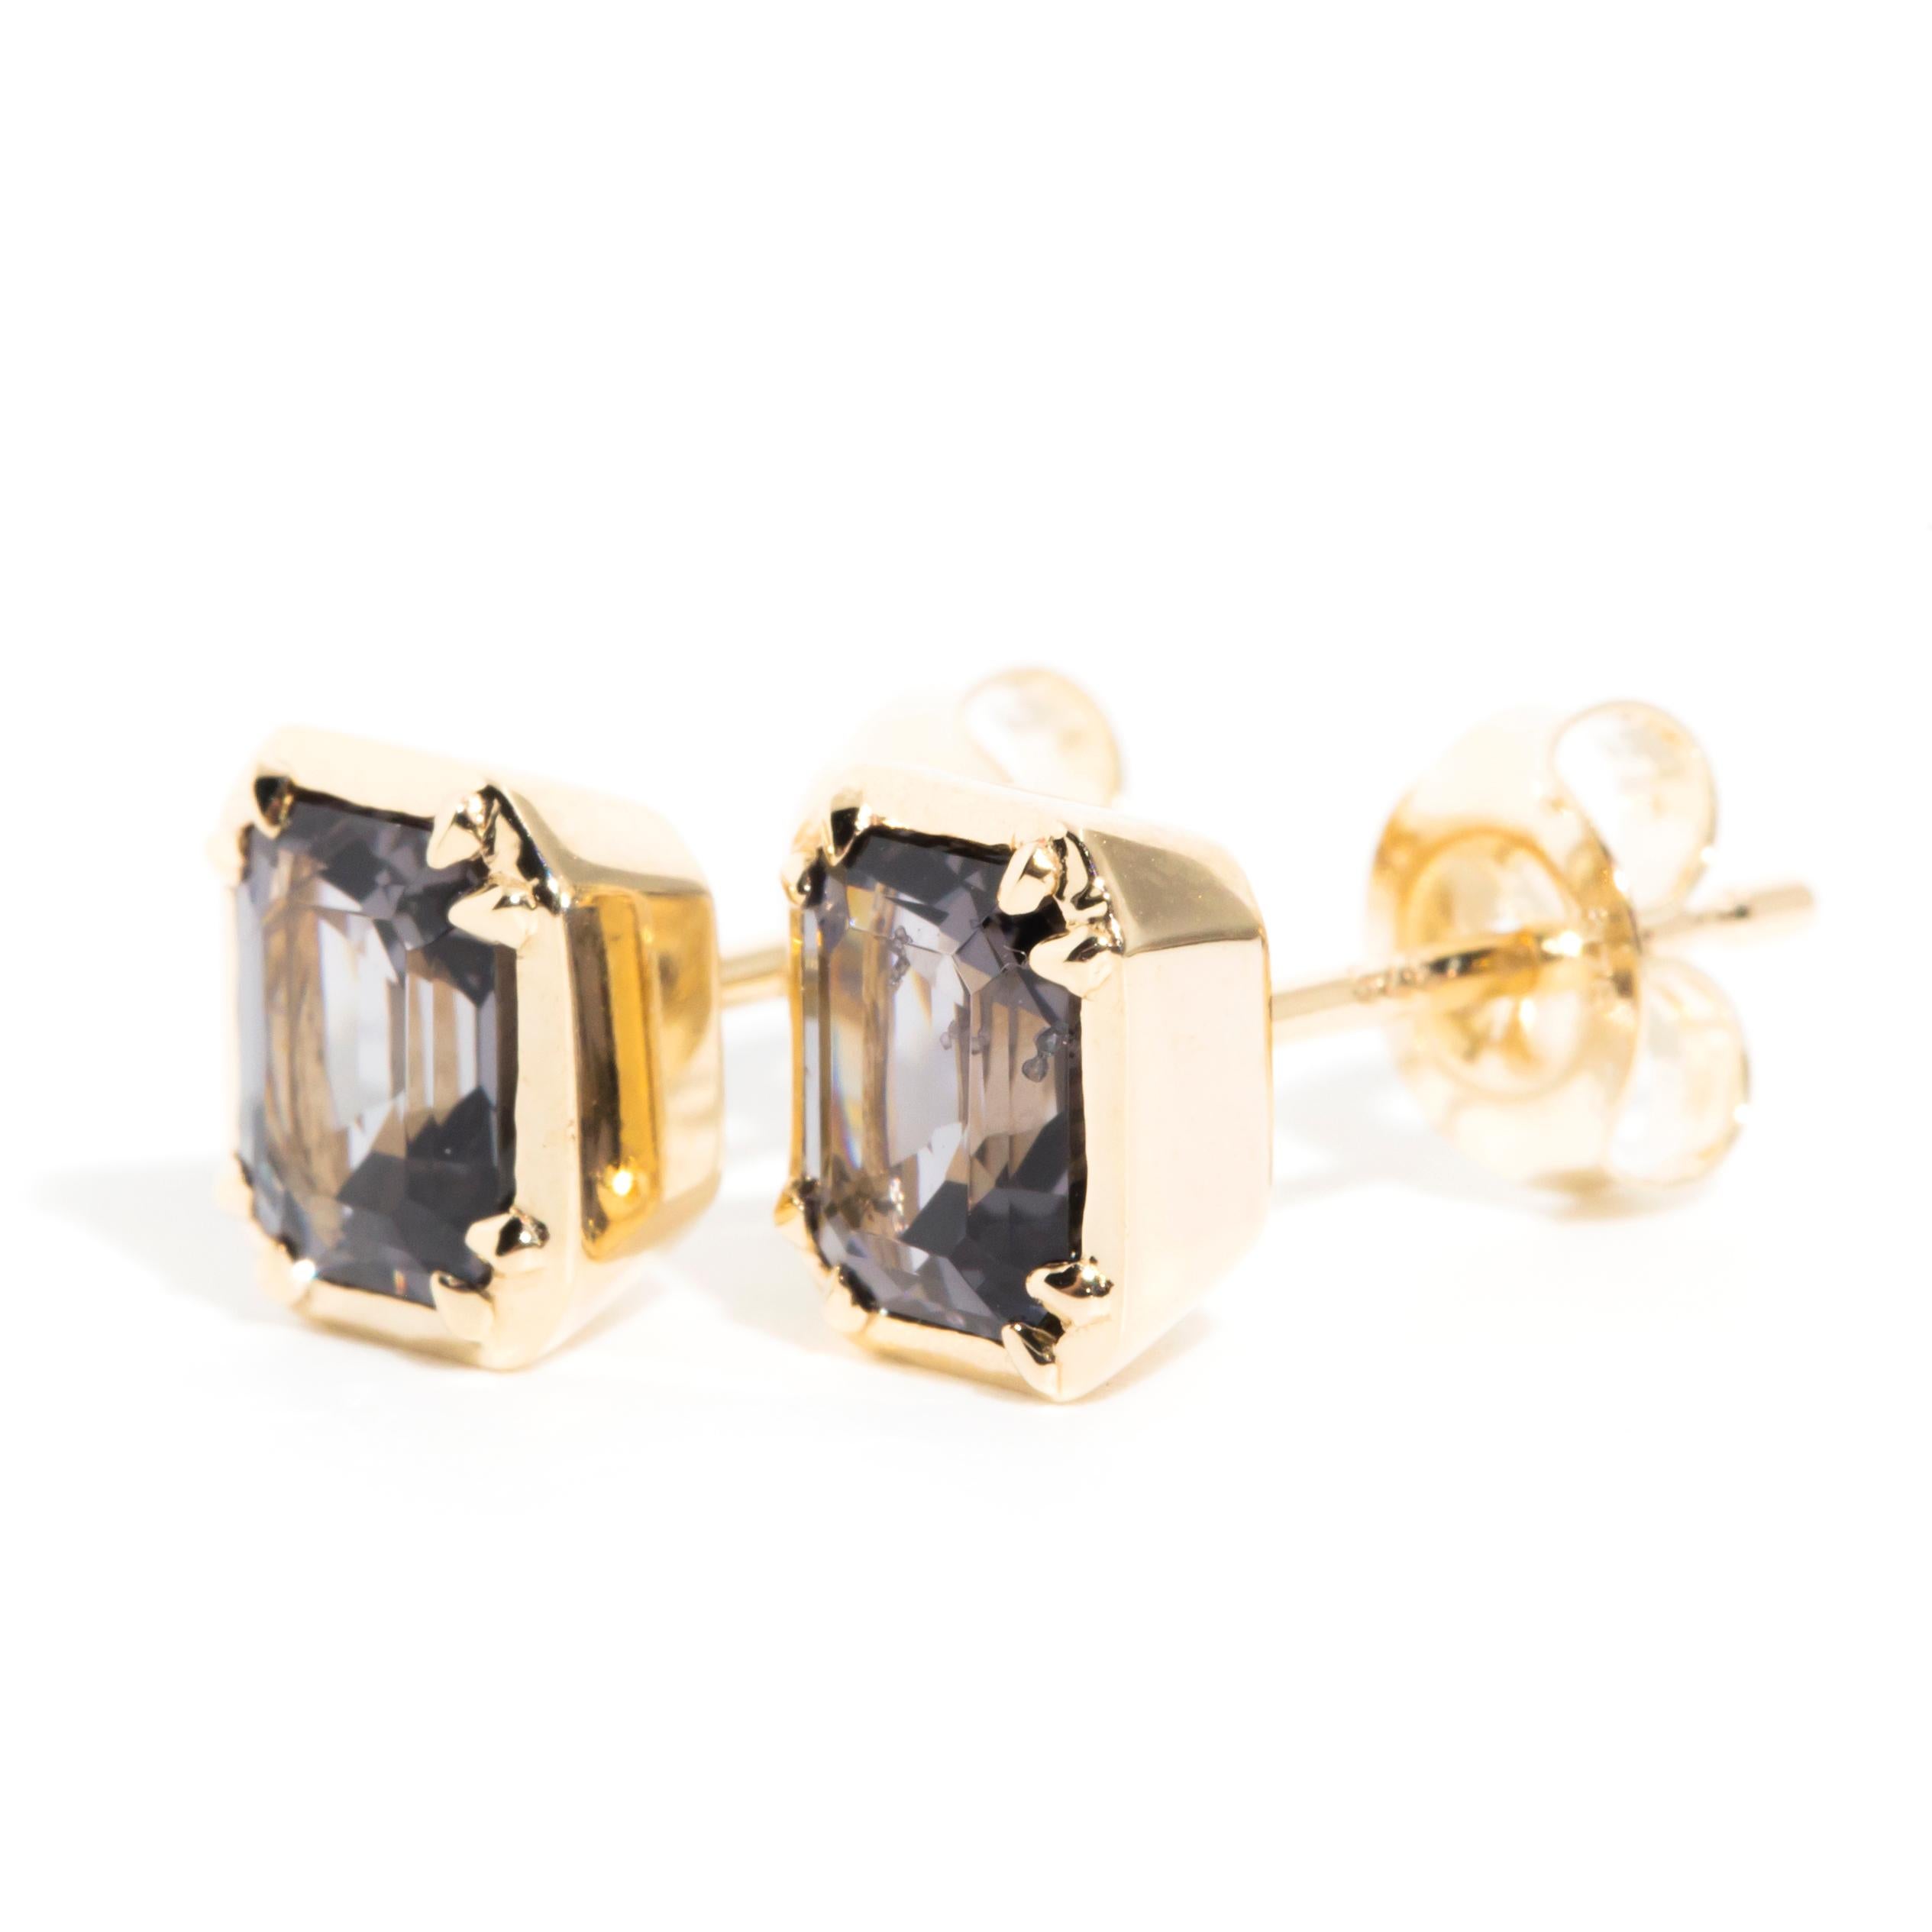 Purple Grey Emerald Cut Spinel Contemporary Stud Style Earrings in 9 Carat Gold 2